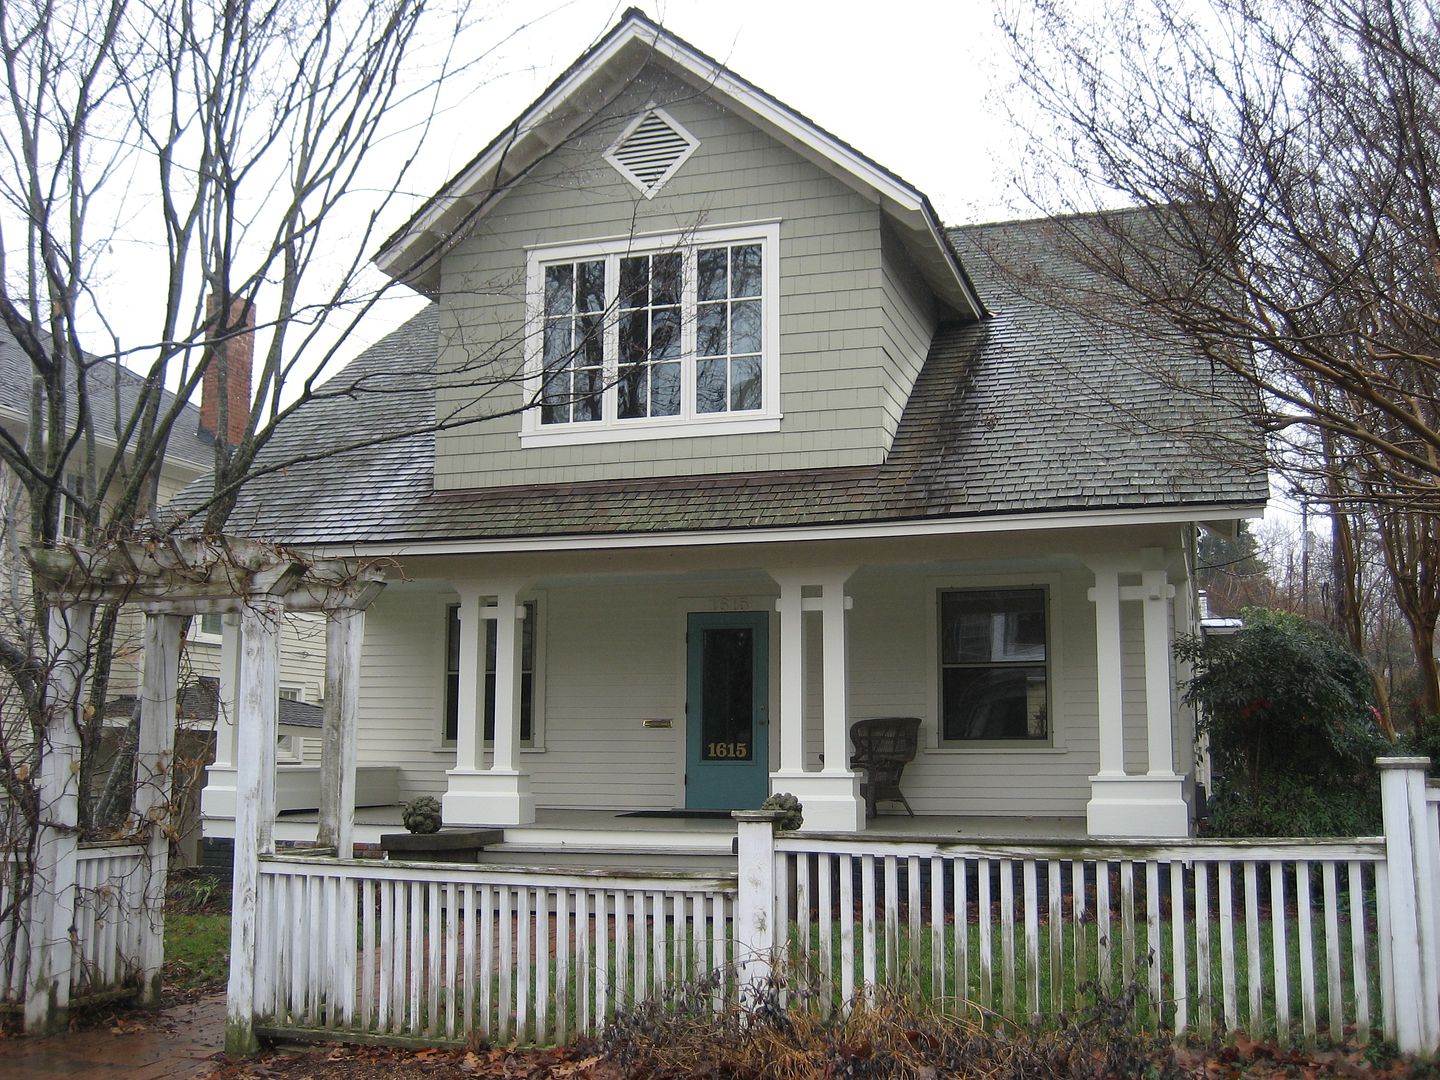 It may not look like a Westly to you at first glance but youll have to trust me on this. It is! The small porch on the dormer has been enclosed to create more space in an upstairs bedroom. This is a common modification, as these areas often leak. 